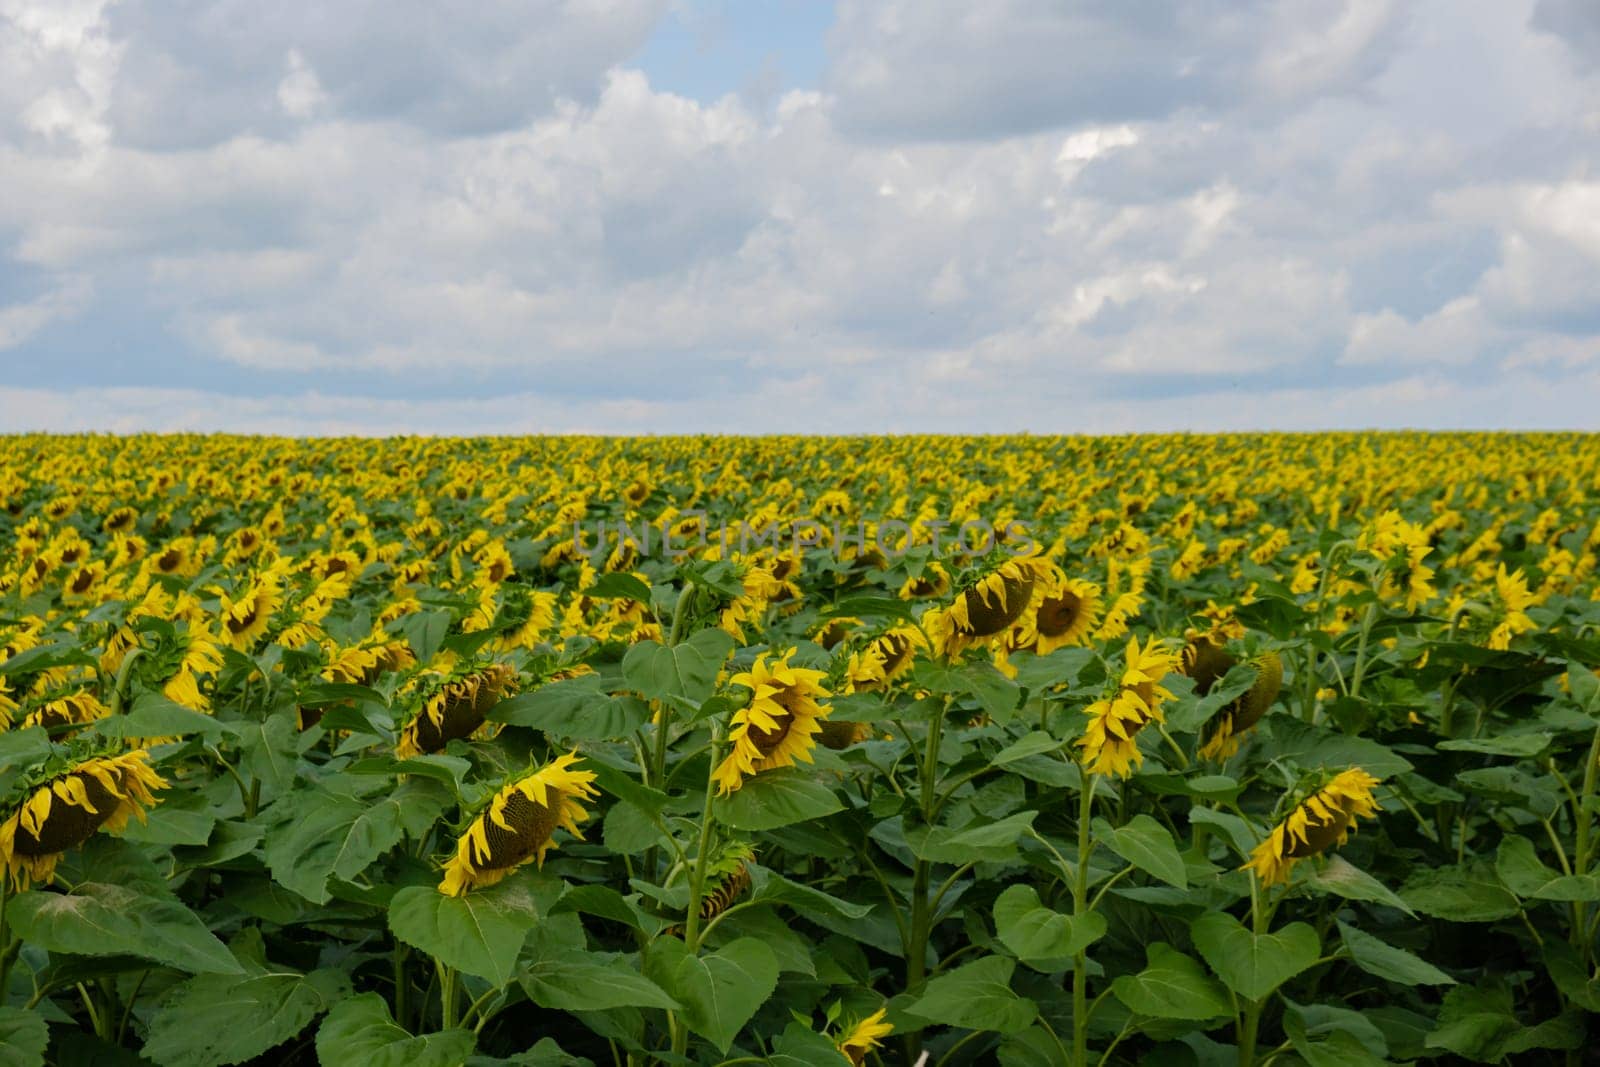 Beautiful sunflower agricultural field. Industrial farming field of blooming sunflowers. Harvest concept. Rural Sunflowers for oil production agronomy landscape